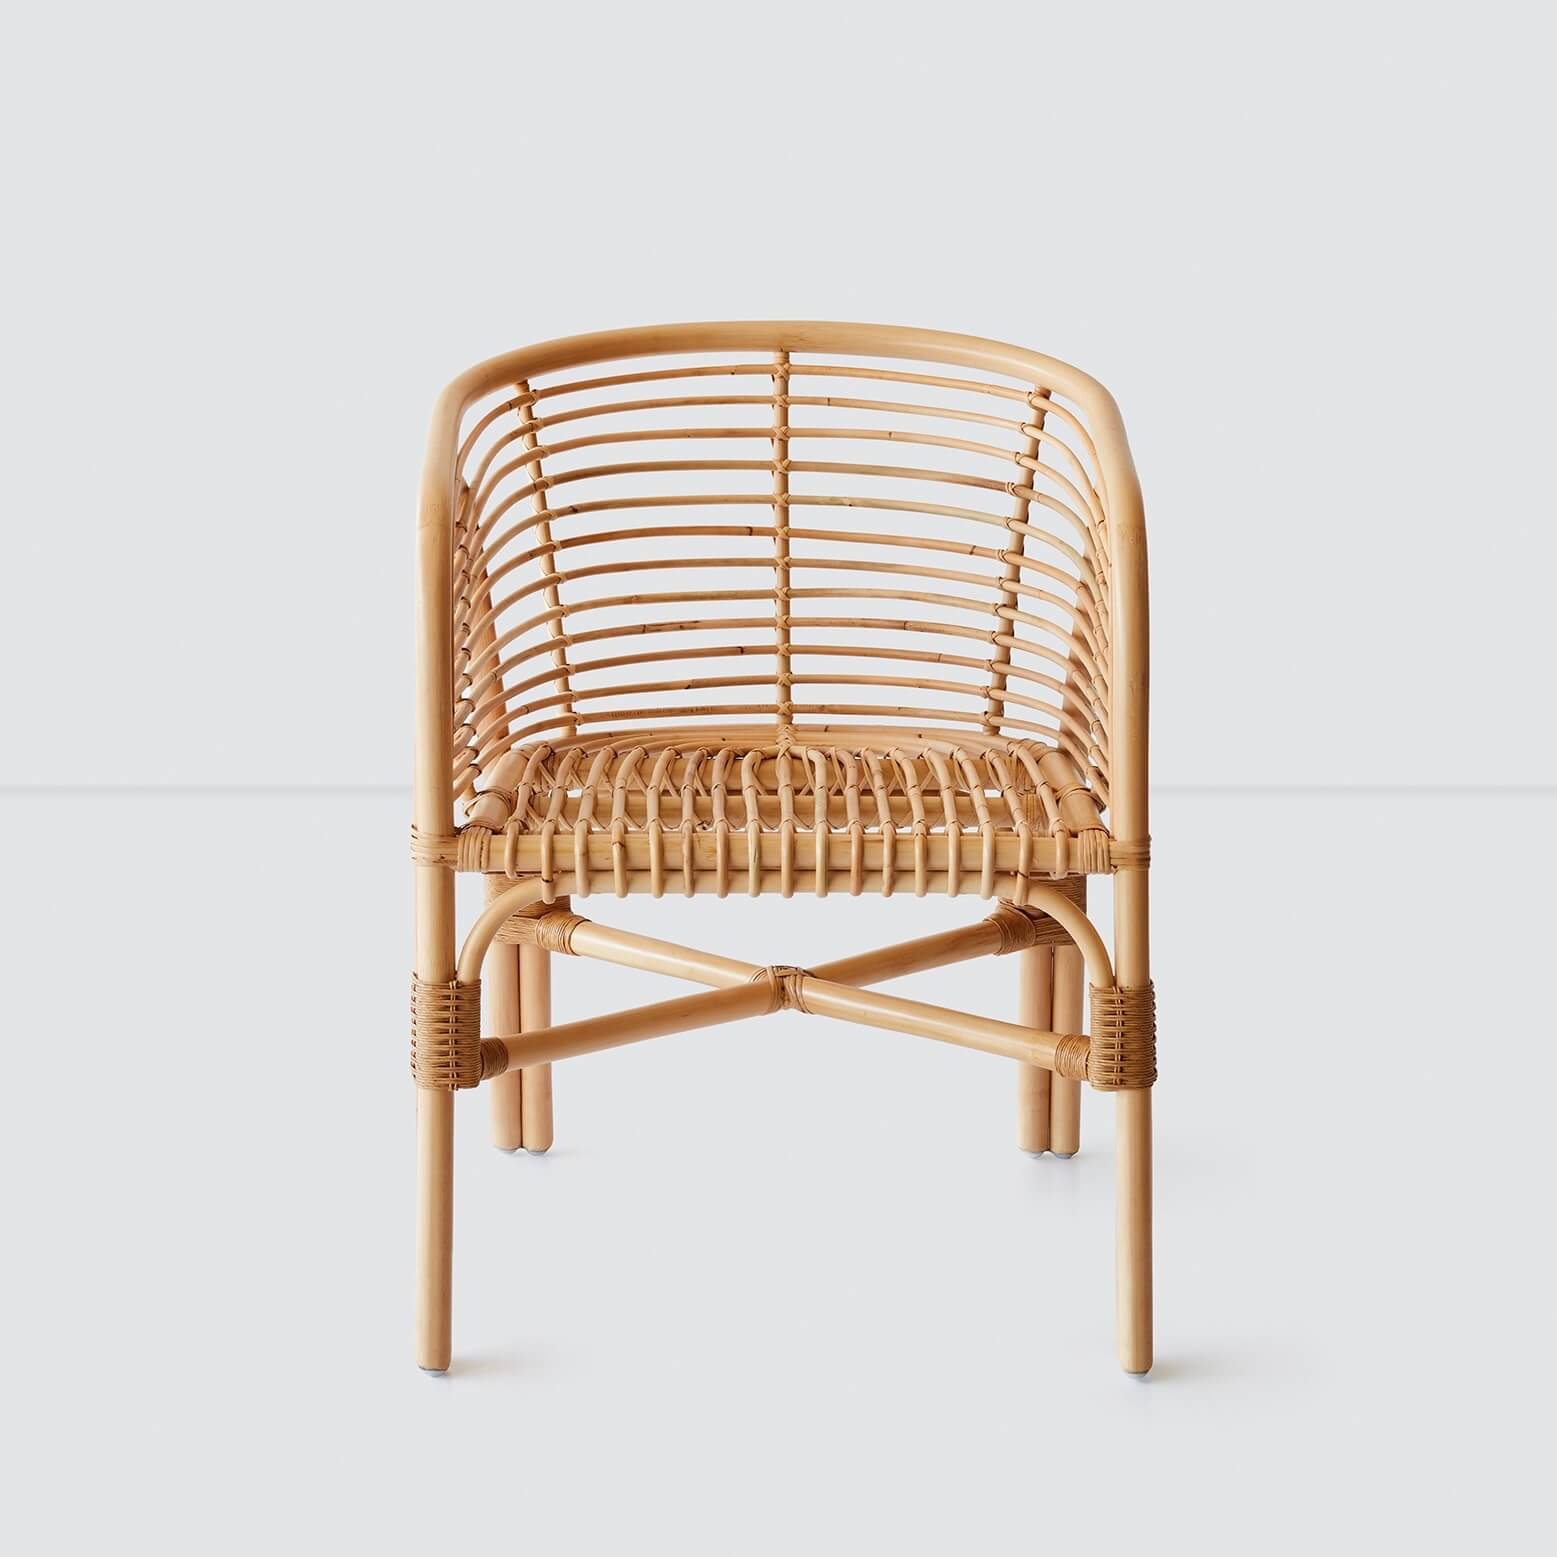 Lombok Rattan Lounge Chair By The Citizenry - Image 0